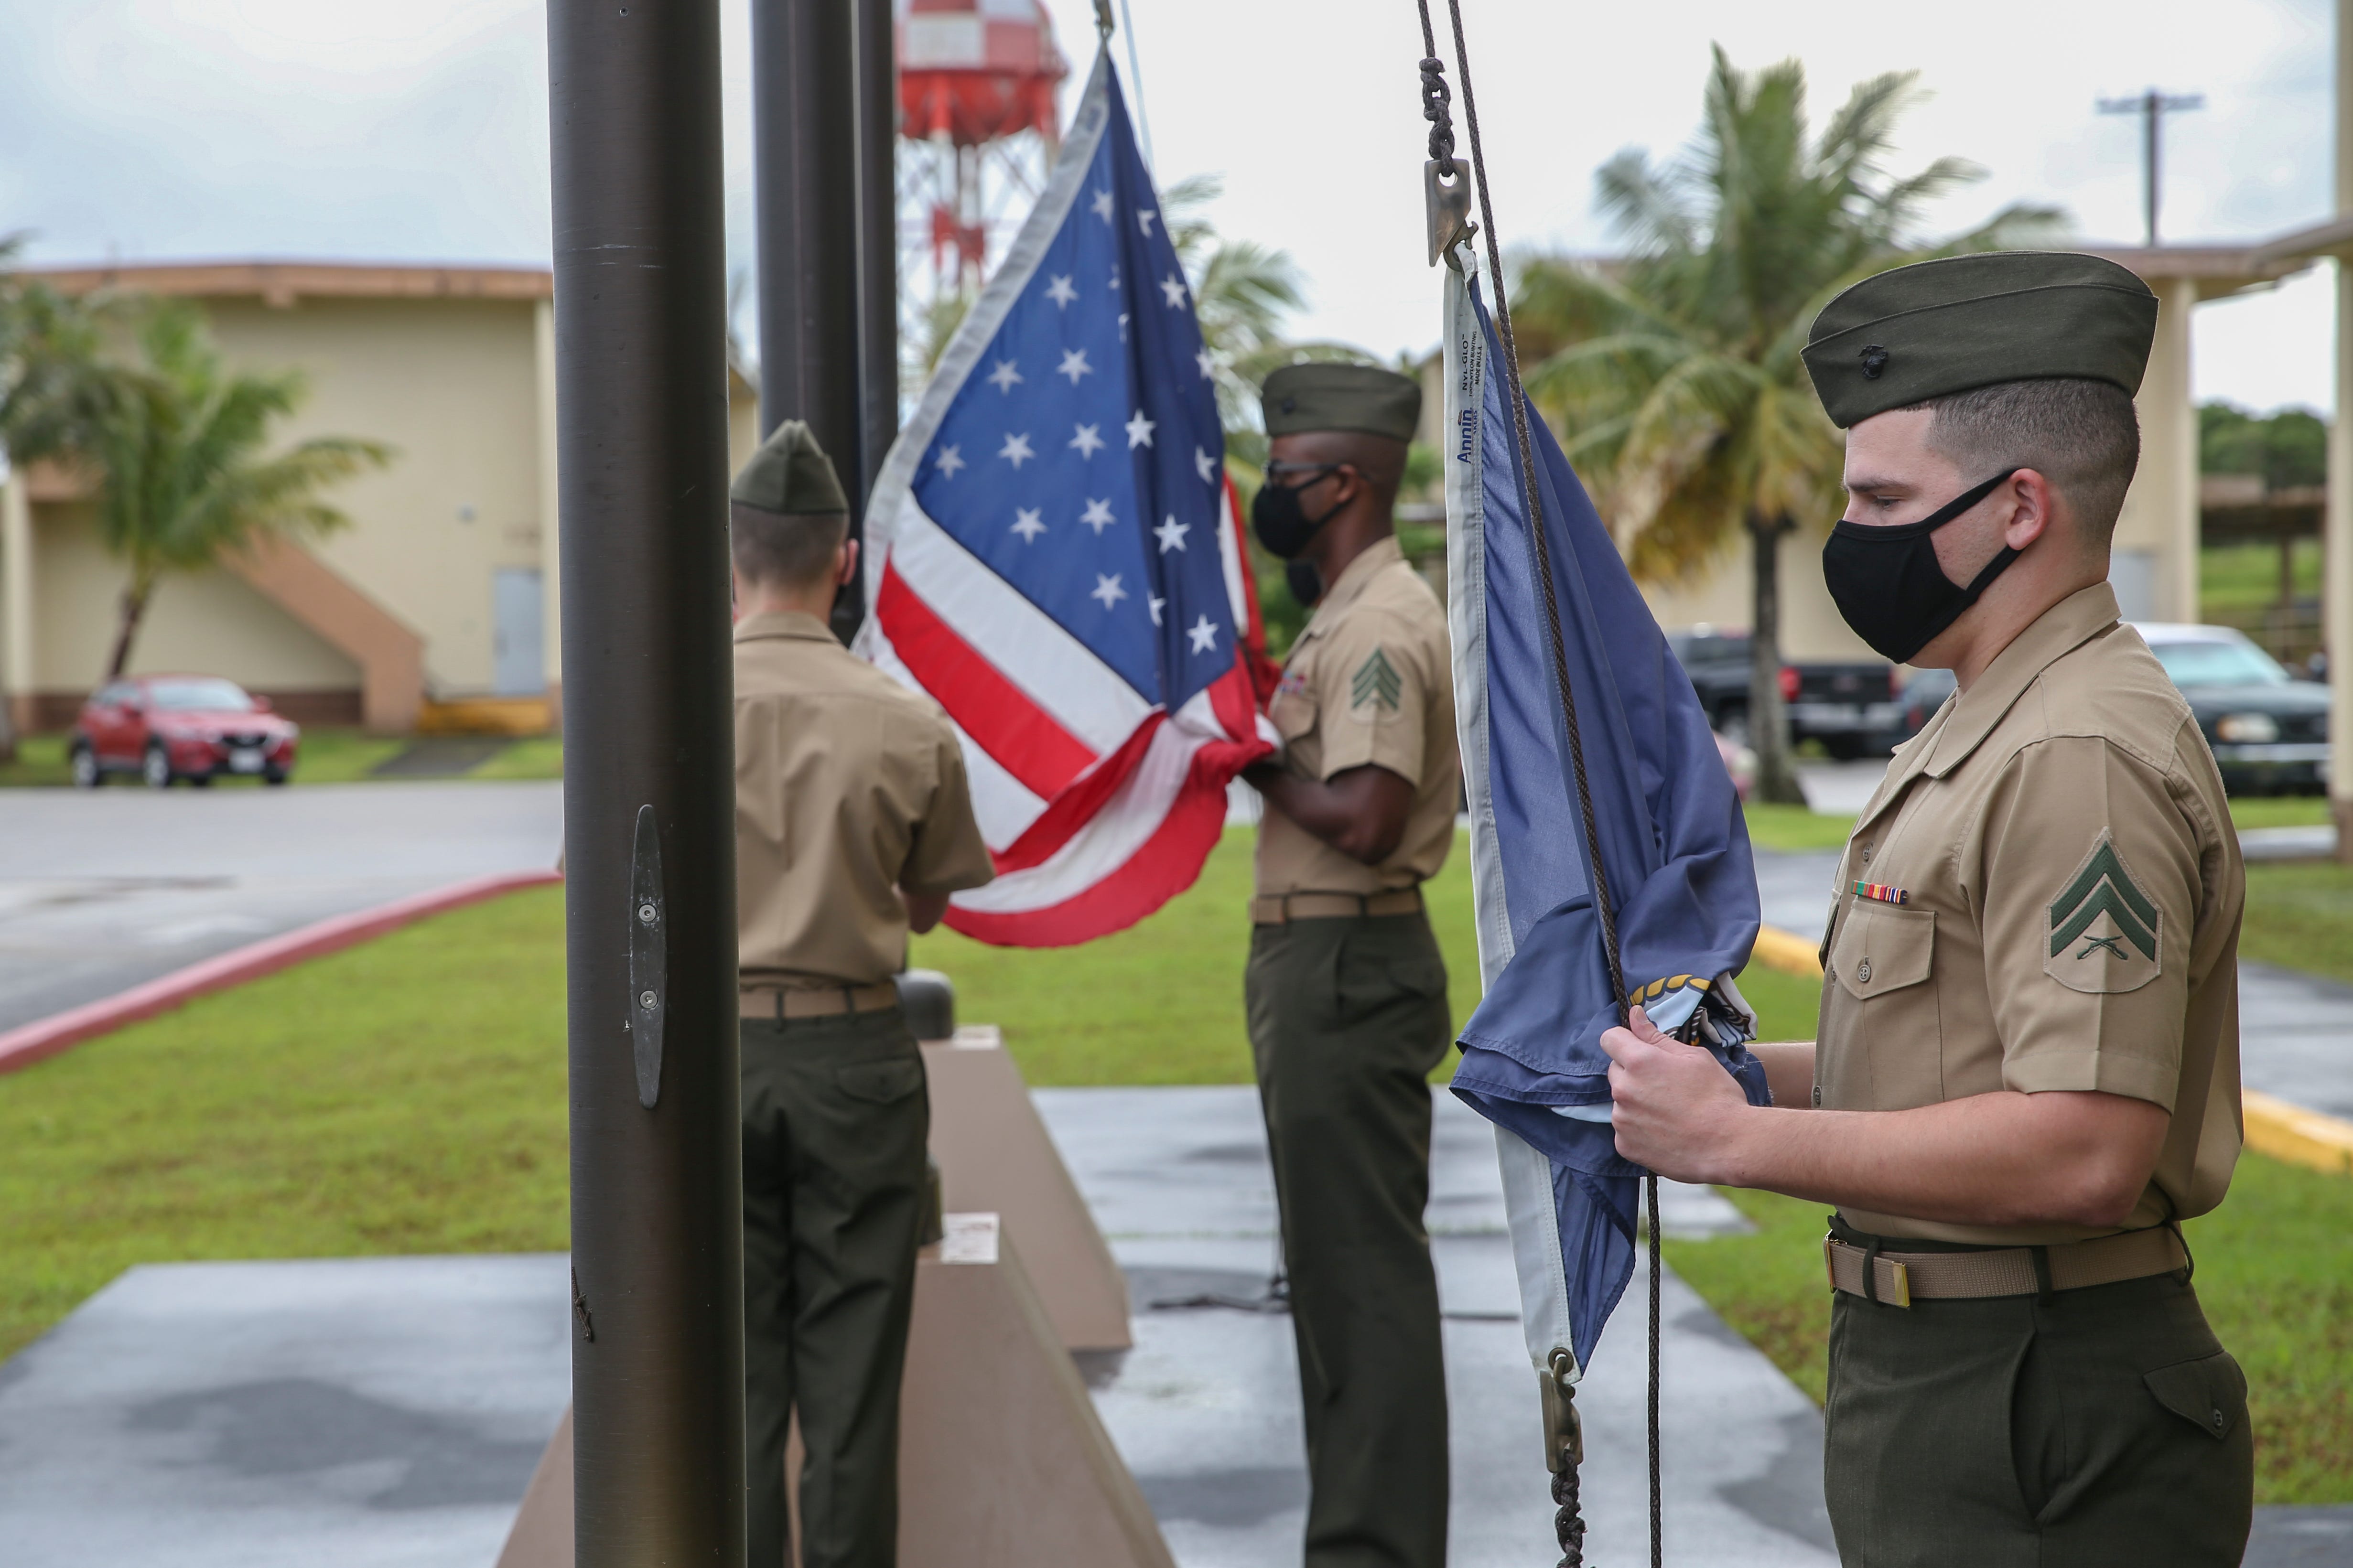 Marines assigned to Camp Blaz conduct the first flag raising of the new command, marking the initial operation capability of the base in Dededo, Guam, Oct. 1, 2020. Camp Blaz is the first Marine Corps base activated since the commissioning of Marine Corps Logistics Base Albany, Georgia, March 1, 1952.